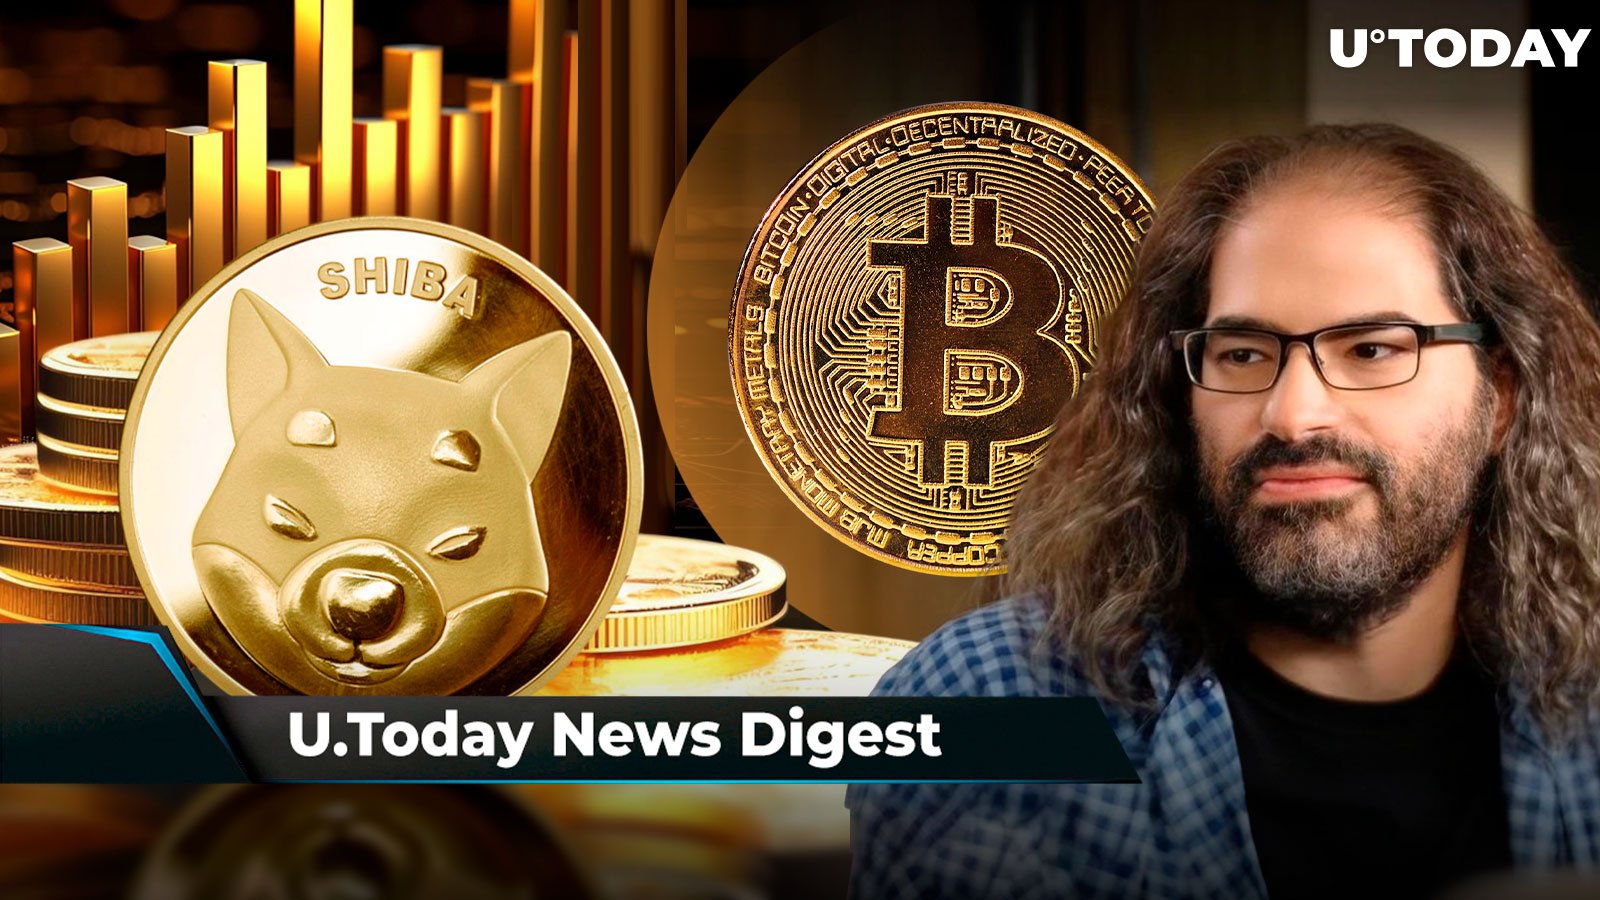 SHIB Secures Second Place in MarketVector's Meme Coin Index, Ripple CTO Breaks Silence on Whether It's Satoshi: U.Today's Crypto News Digest